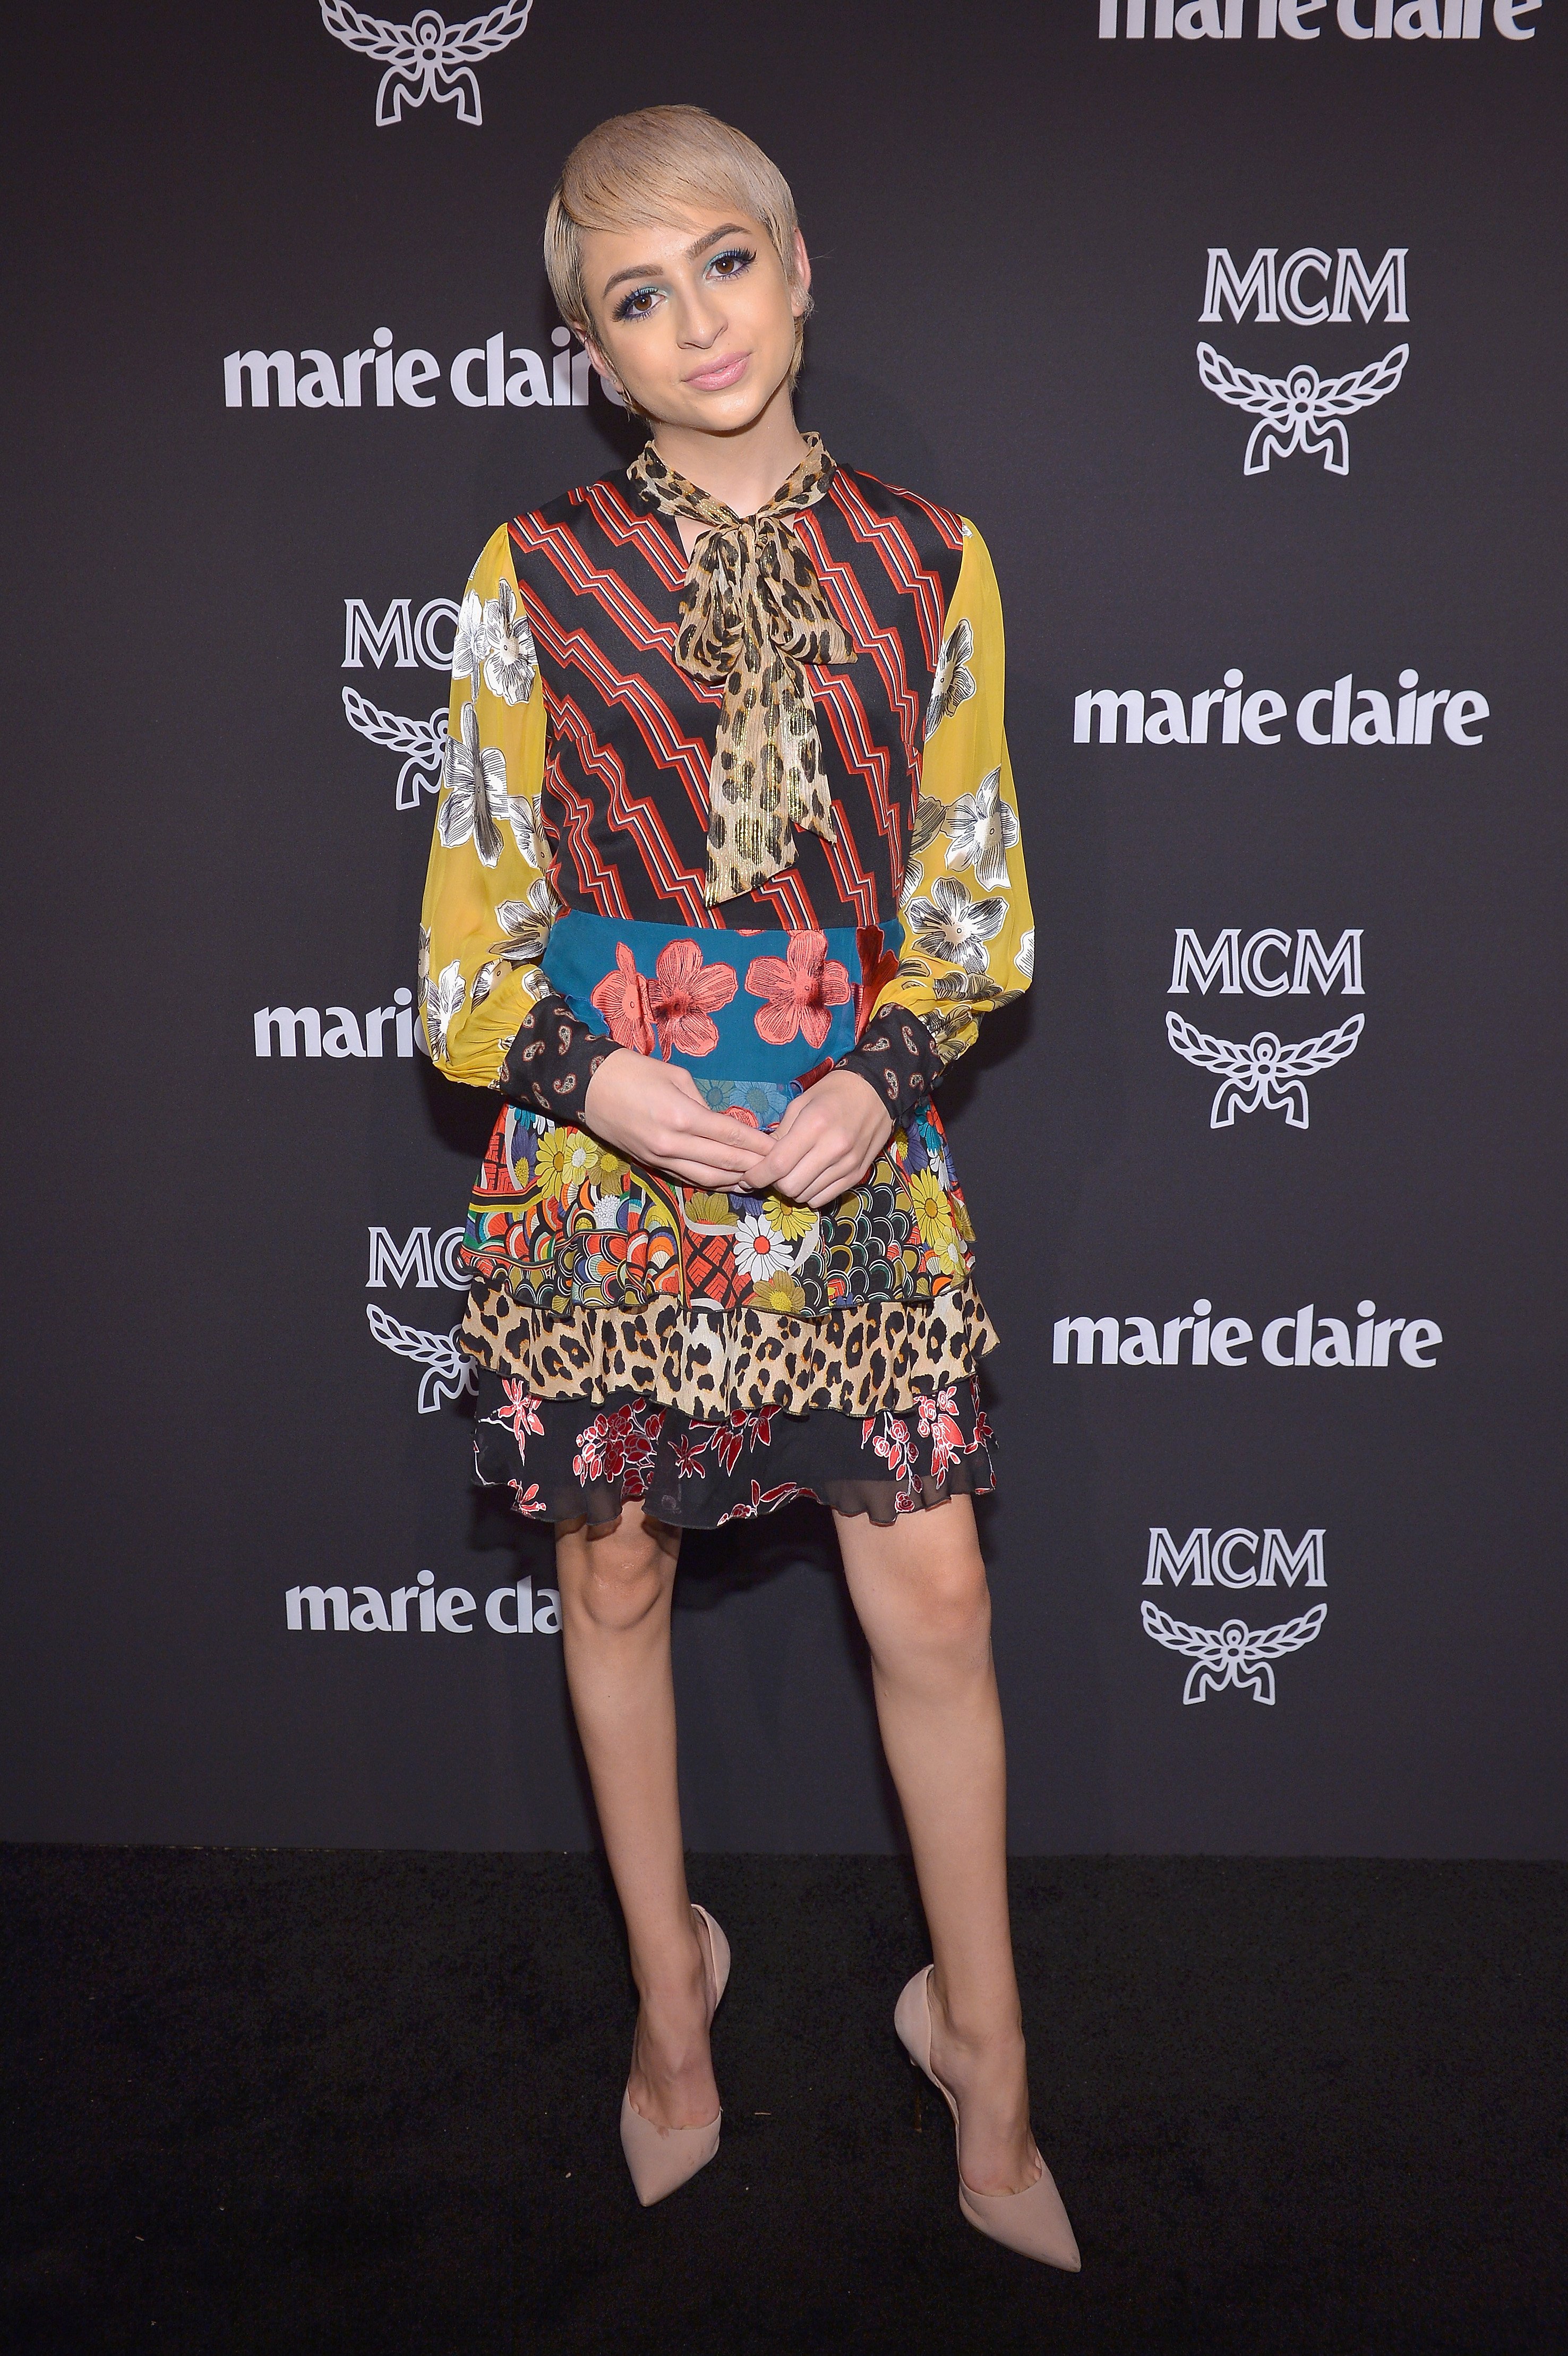 Josie Jay Totah attending MCM x Marie Claire Change Makers Event at Hills Penthouse in West Hollywood, California, in March 2019. | Image: Getty Images..